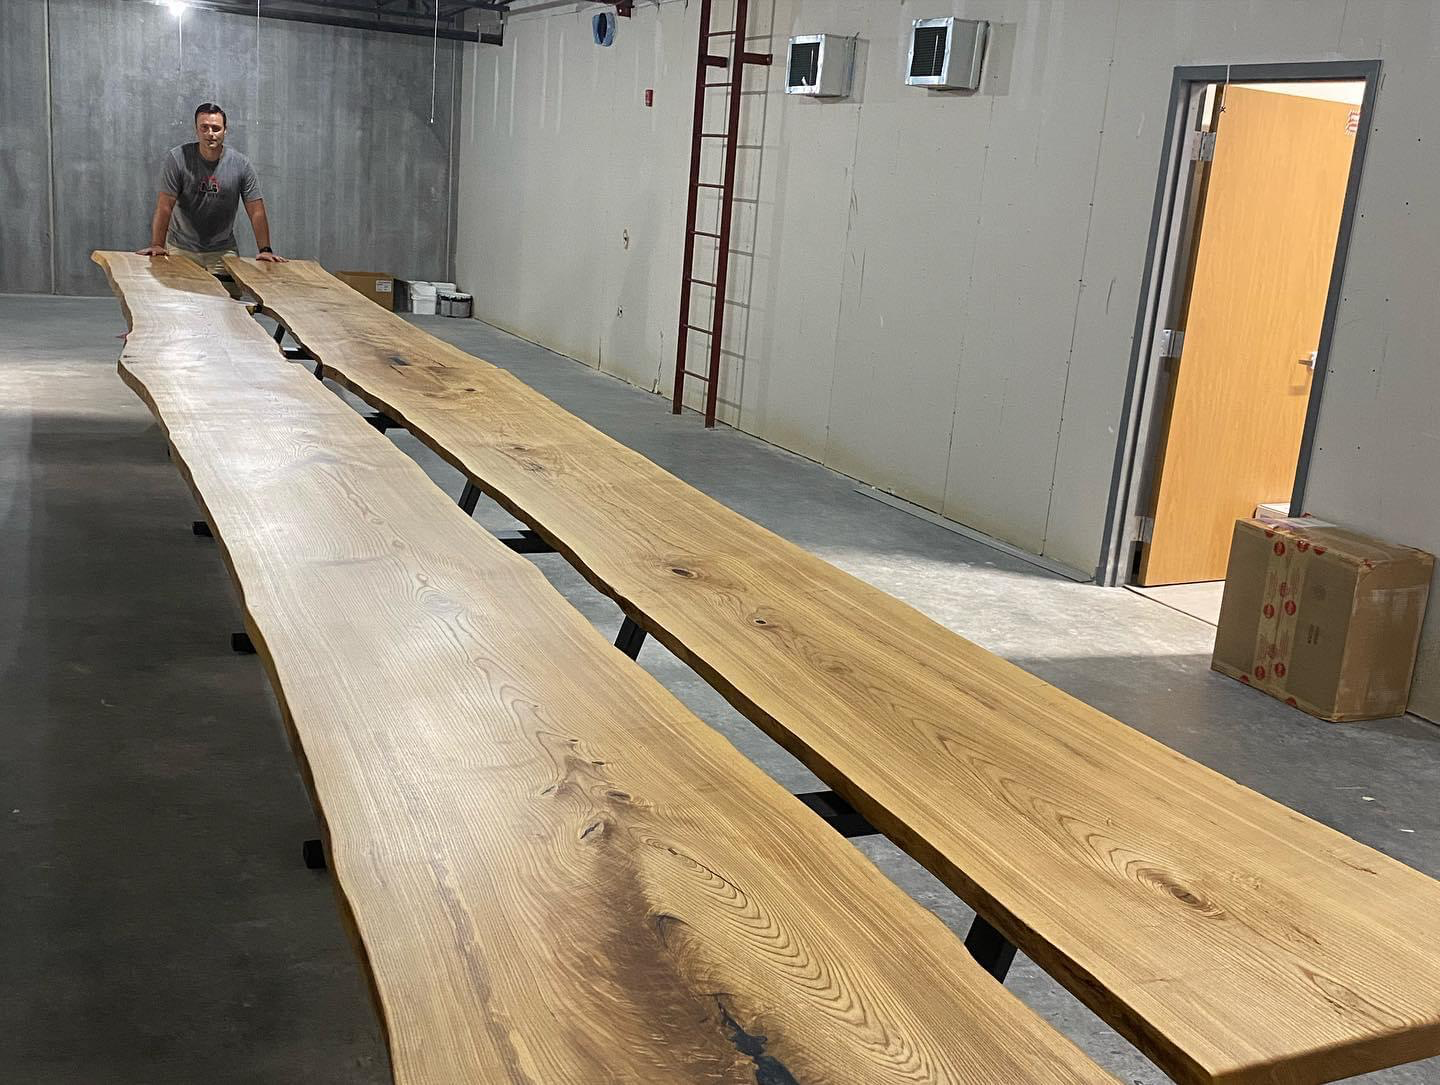 A 30-foot-long table for Hubler Honda in Taylorsville, Ind.